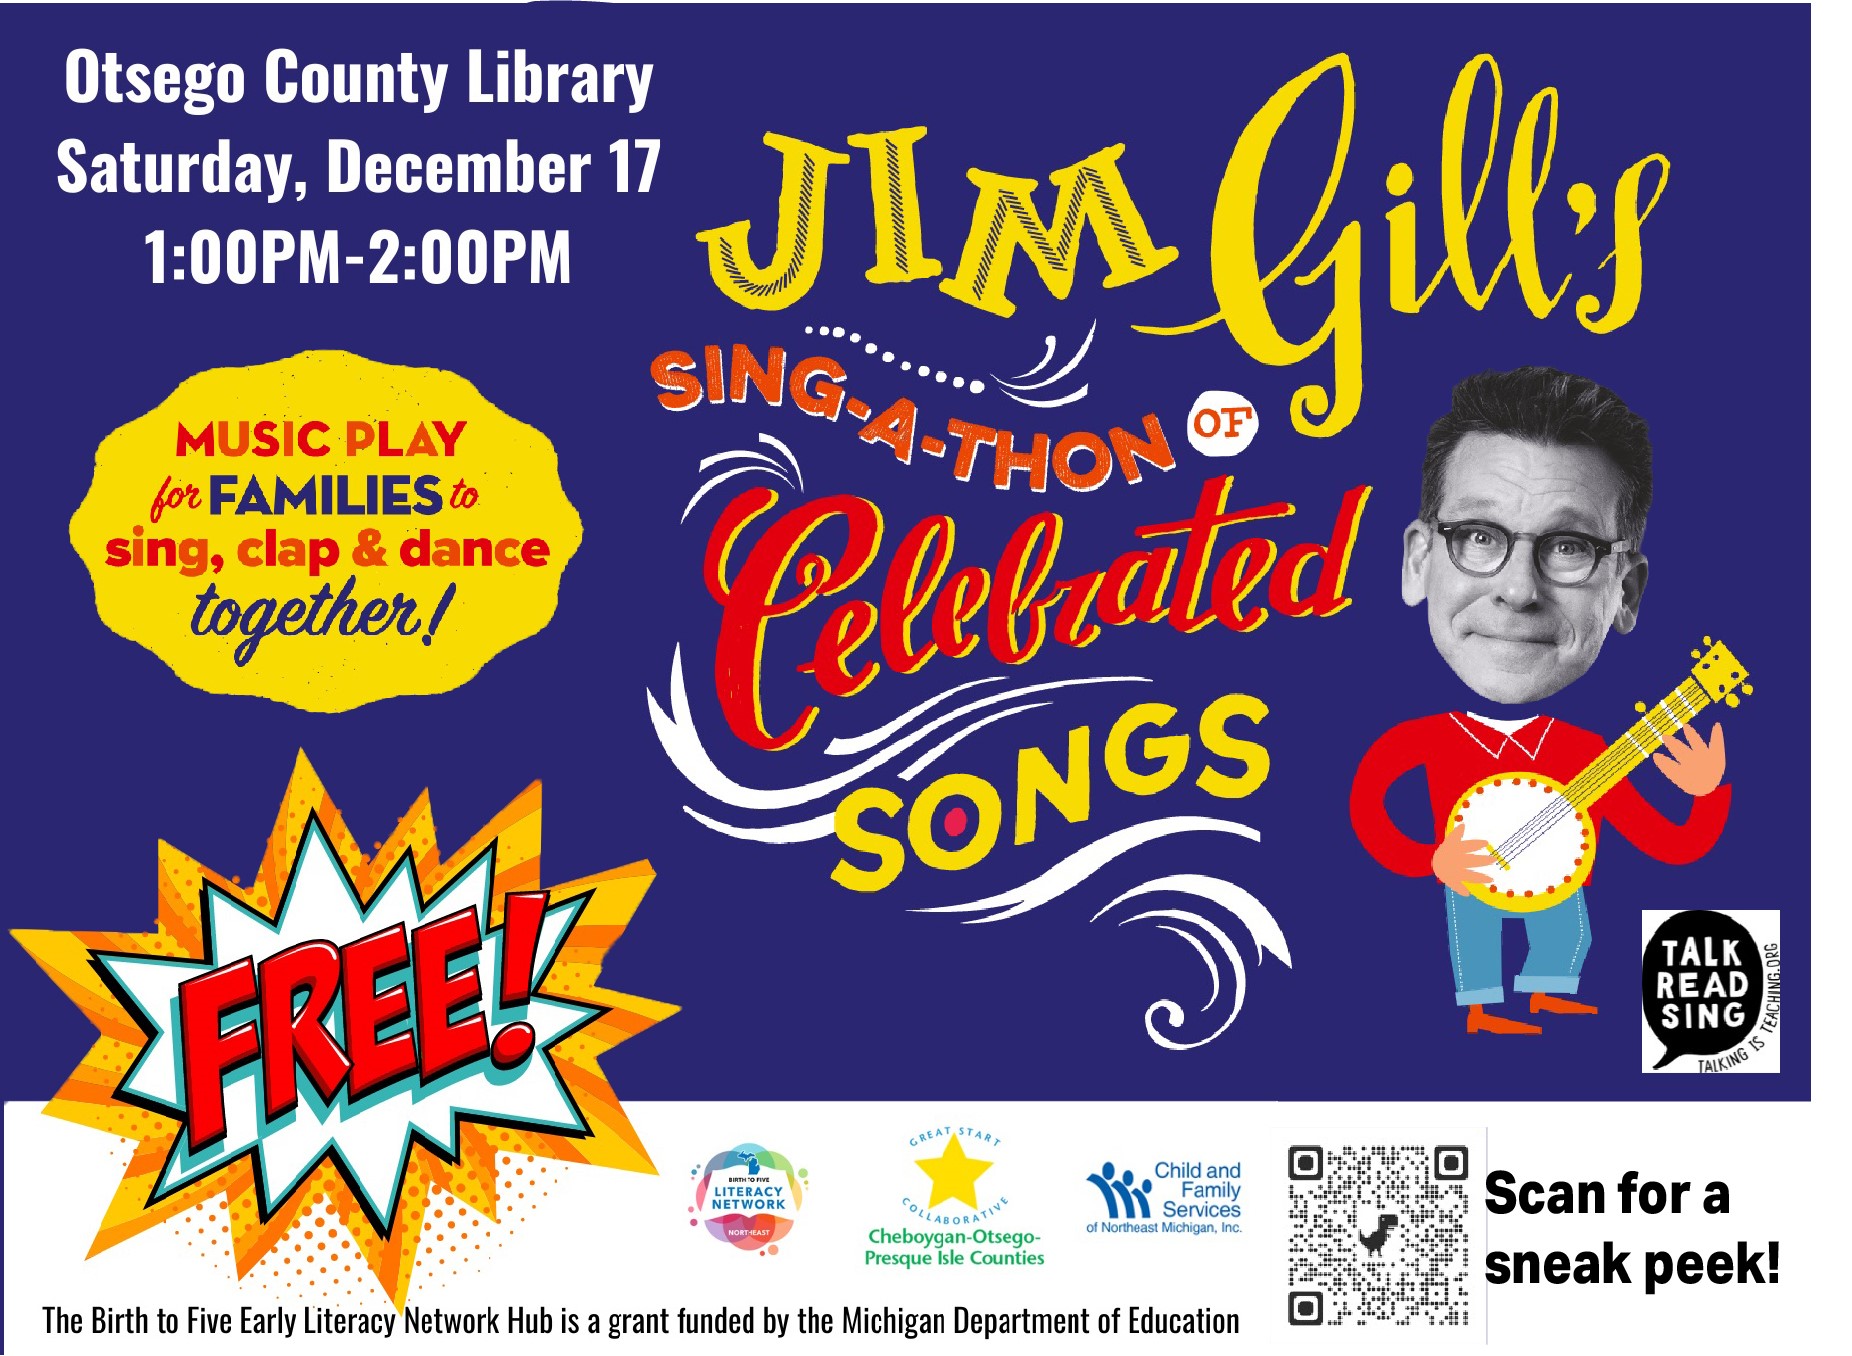 Bring your family and join us for a Sing-a-long with Jim Gill Saturday December 17 at 1 pm